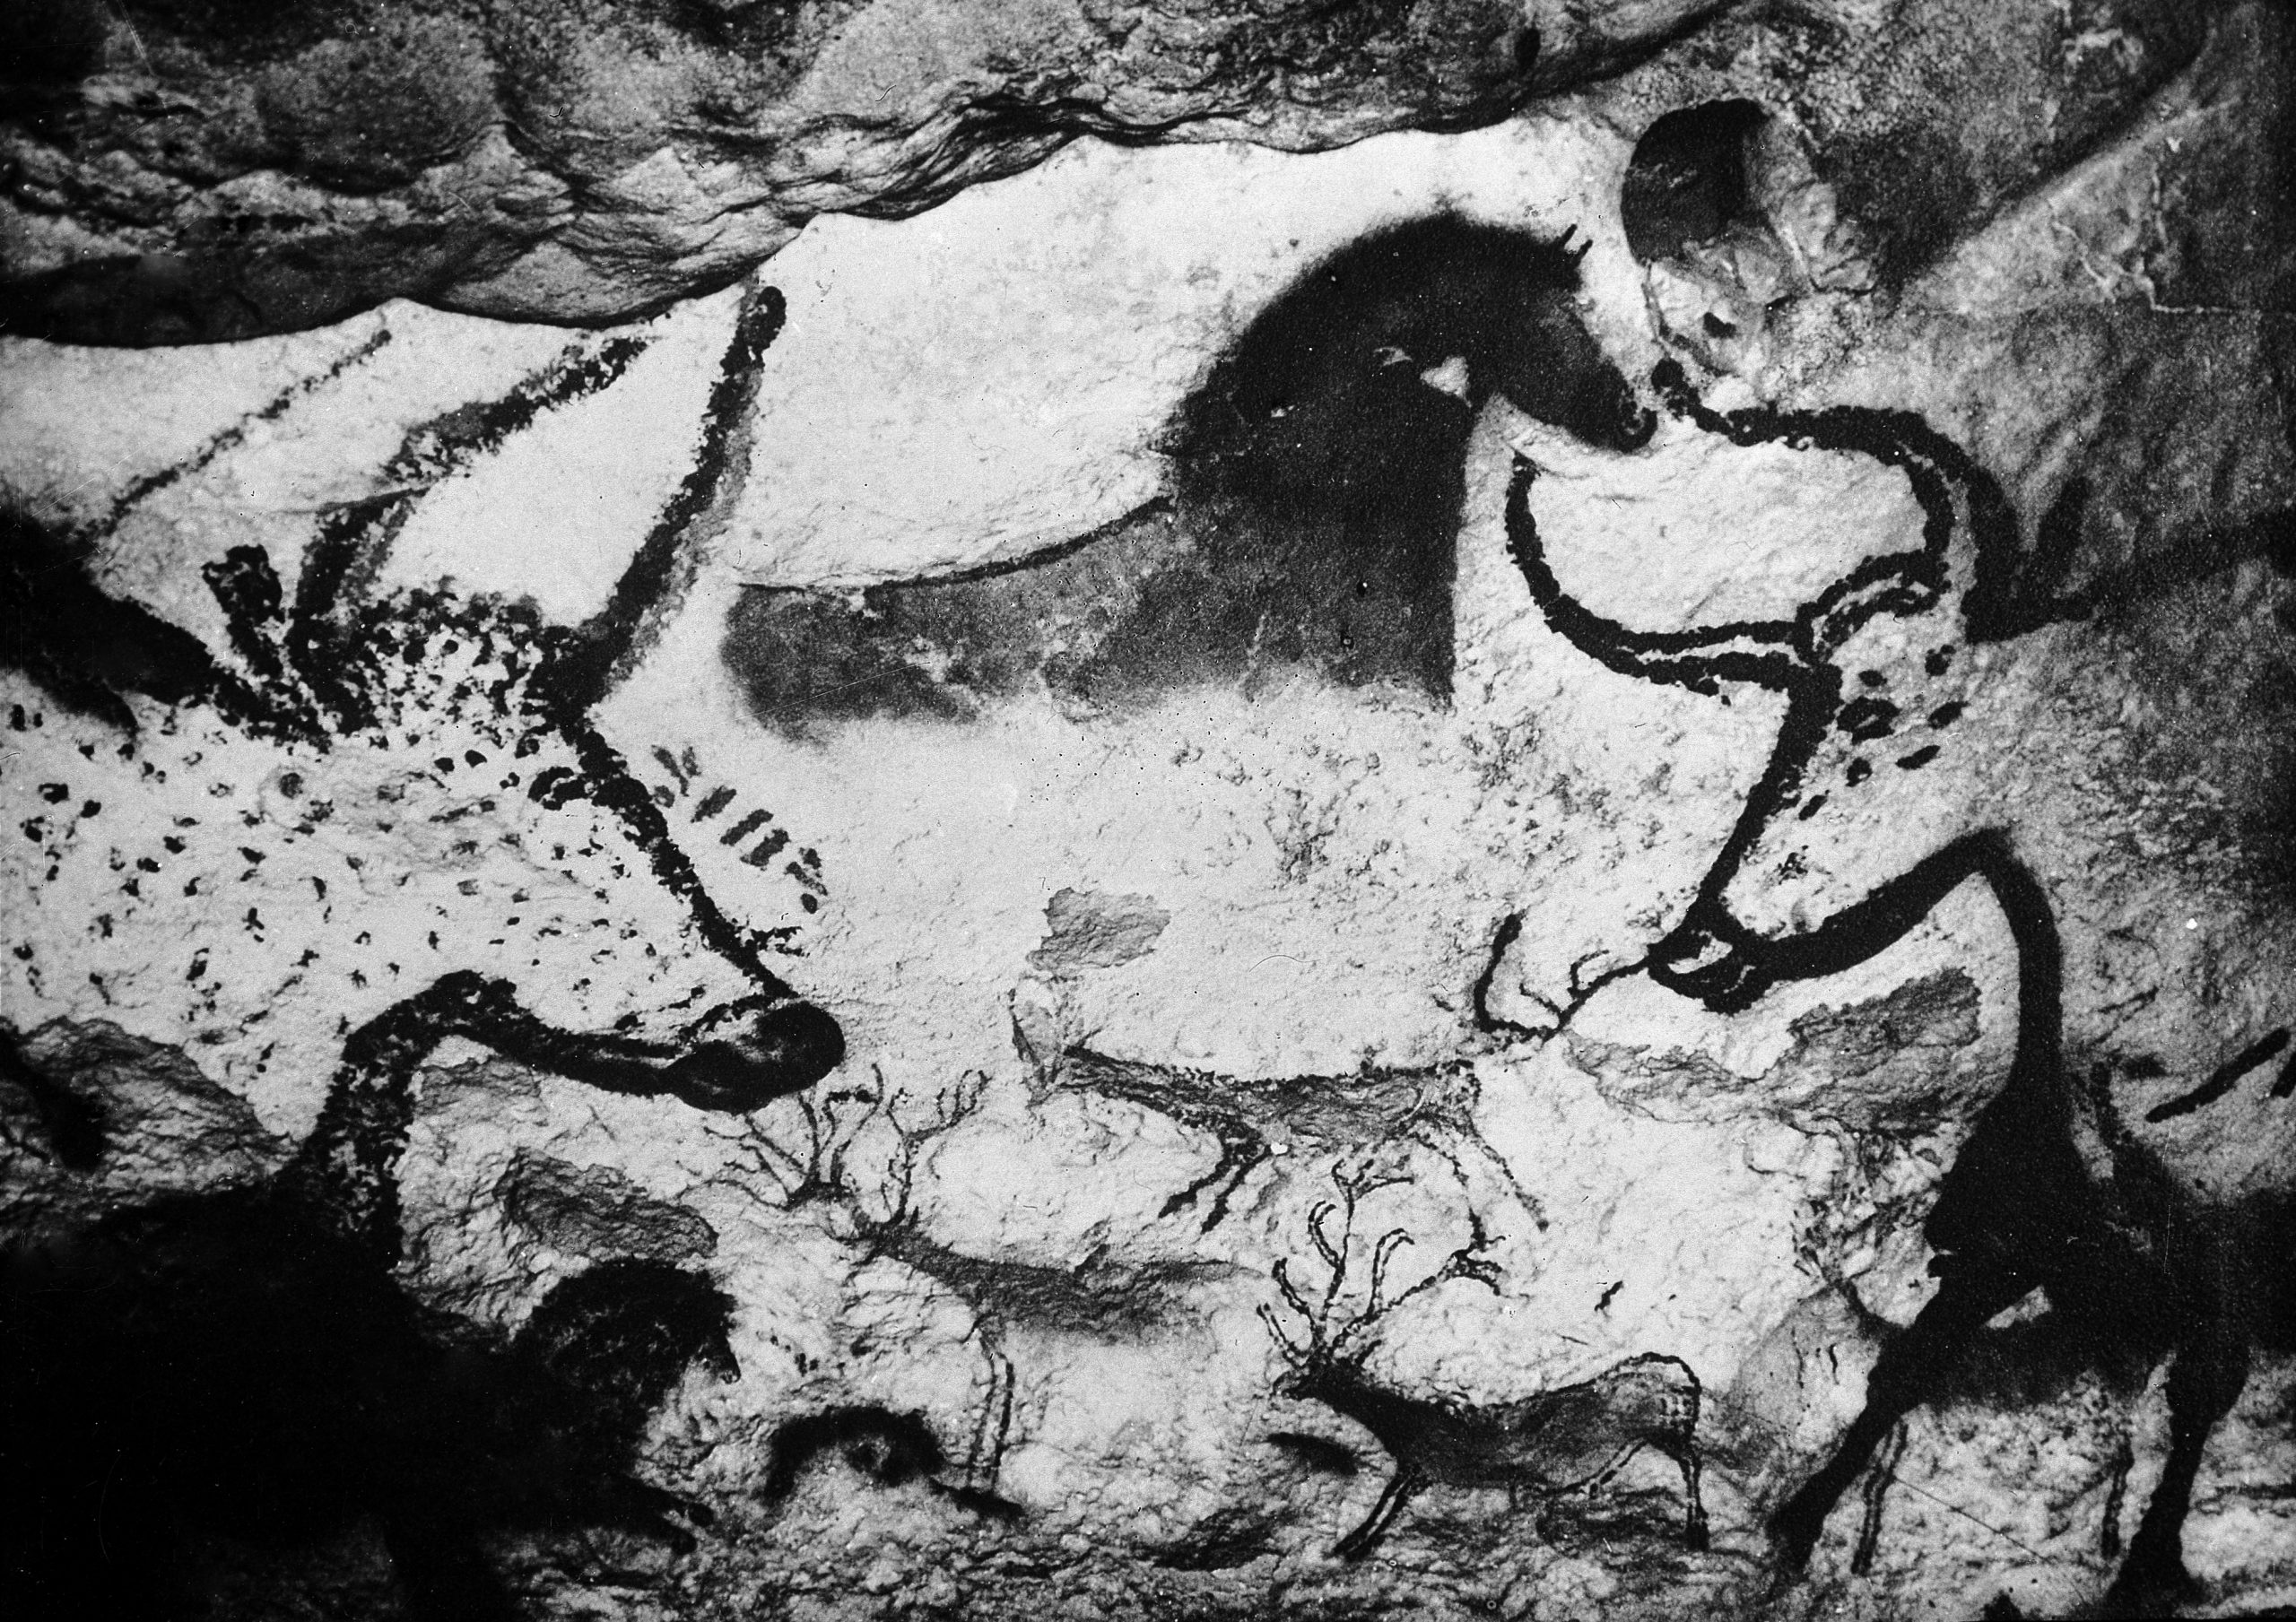 M0010910 Cervids Painted On Cave Wall And Caervids, Bovids And Horses